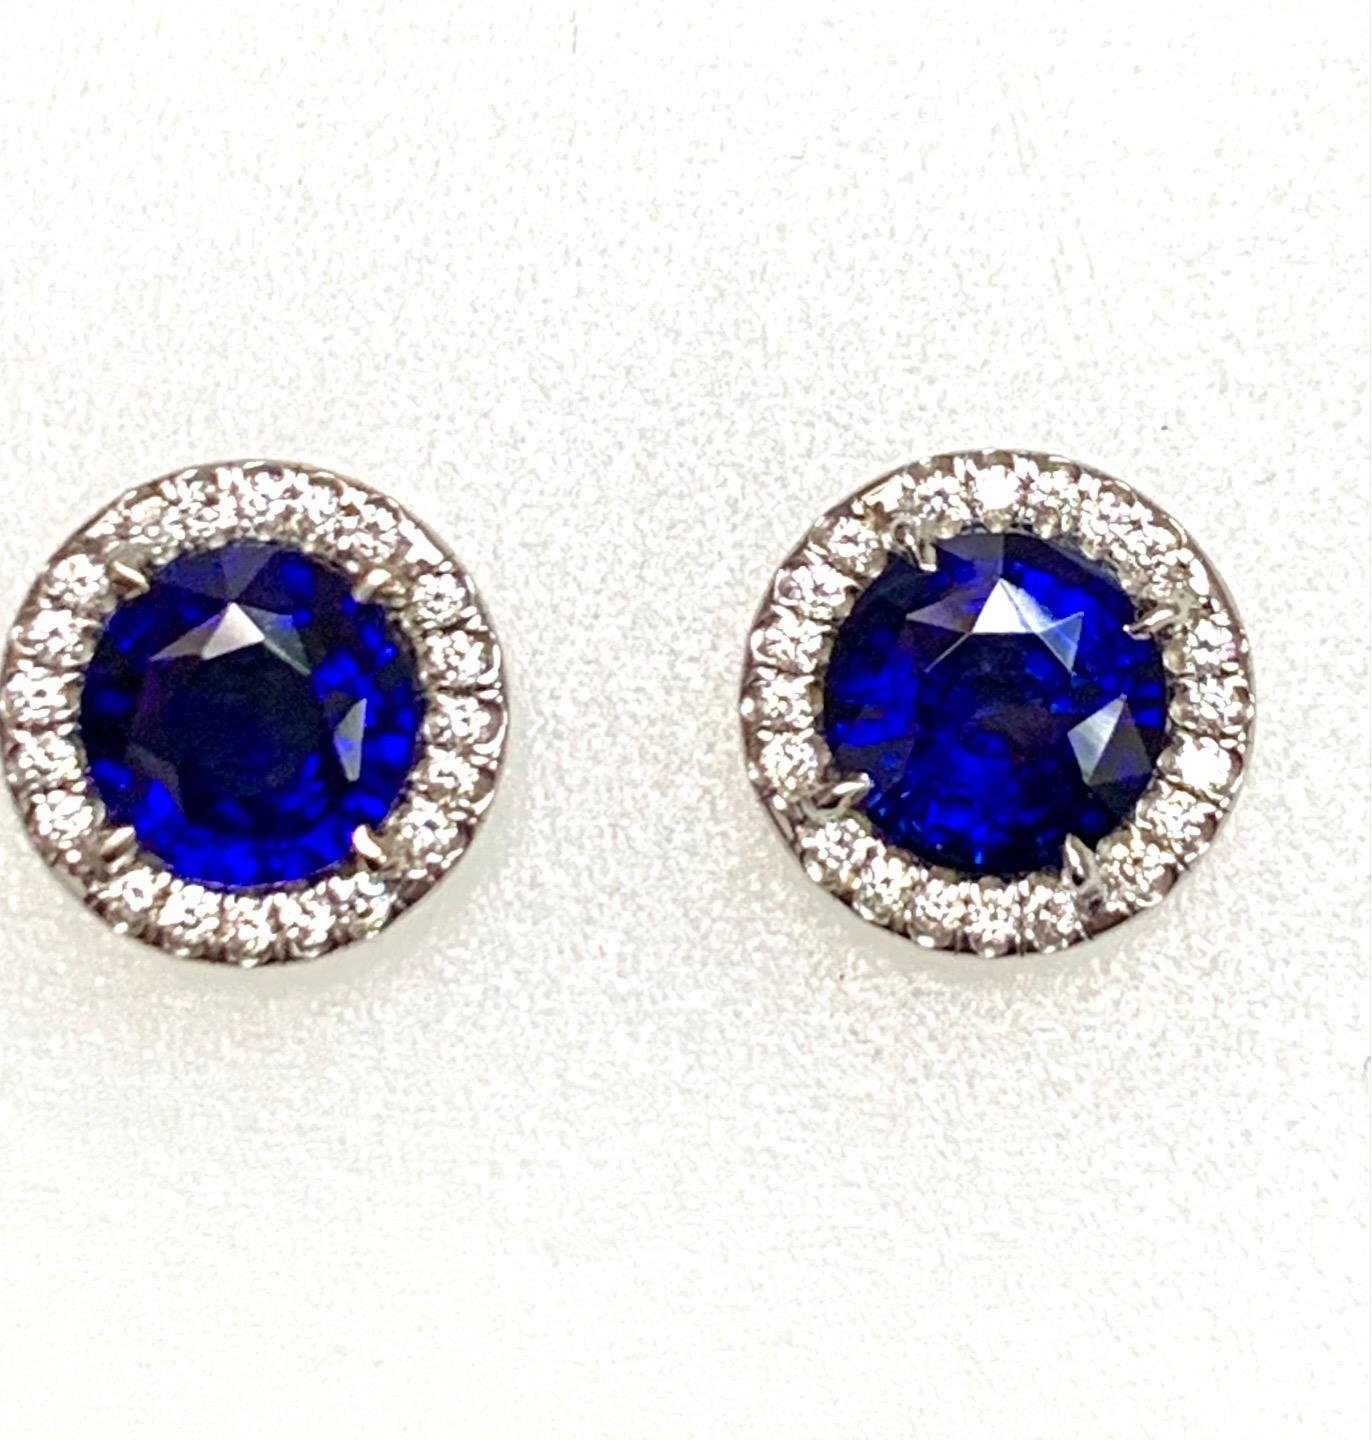 6.02 Carat round sapphire set in 18k white gold earrings with 0.60 carat pave set diamonds .